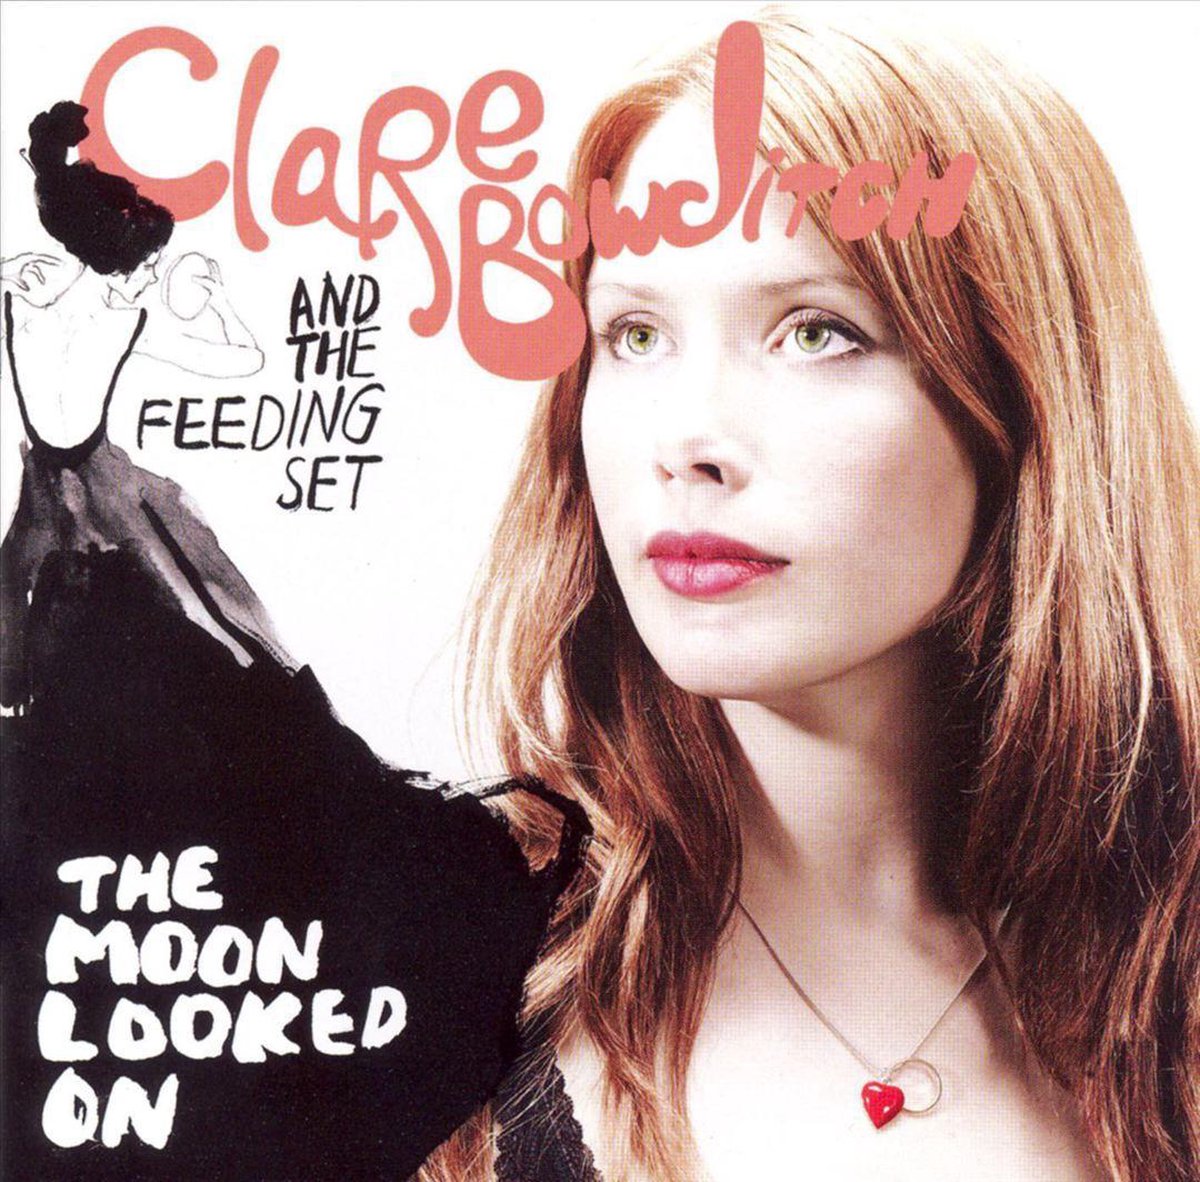 Moon Looked On - Clare Bowditch & the Feeding Set